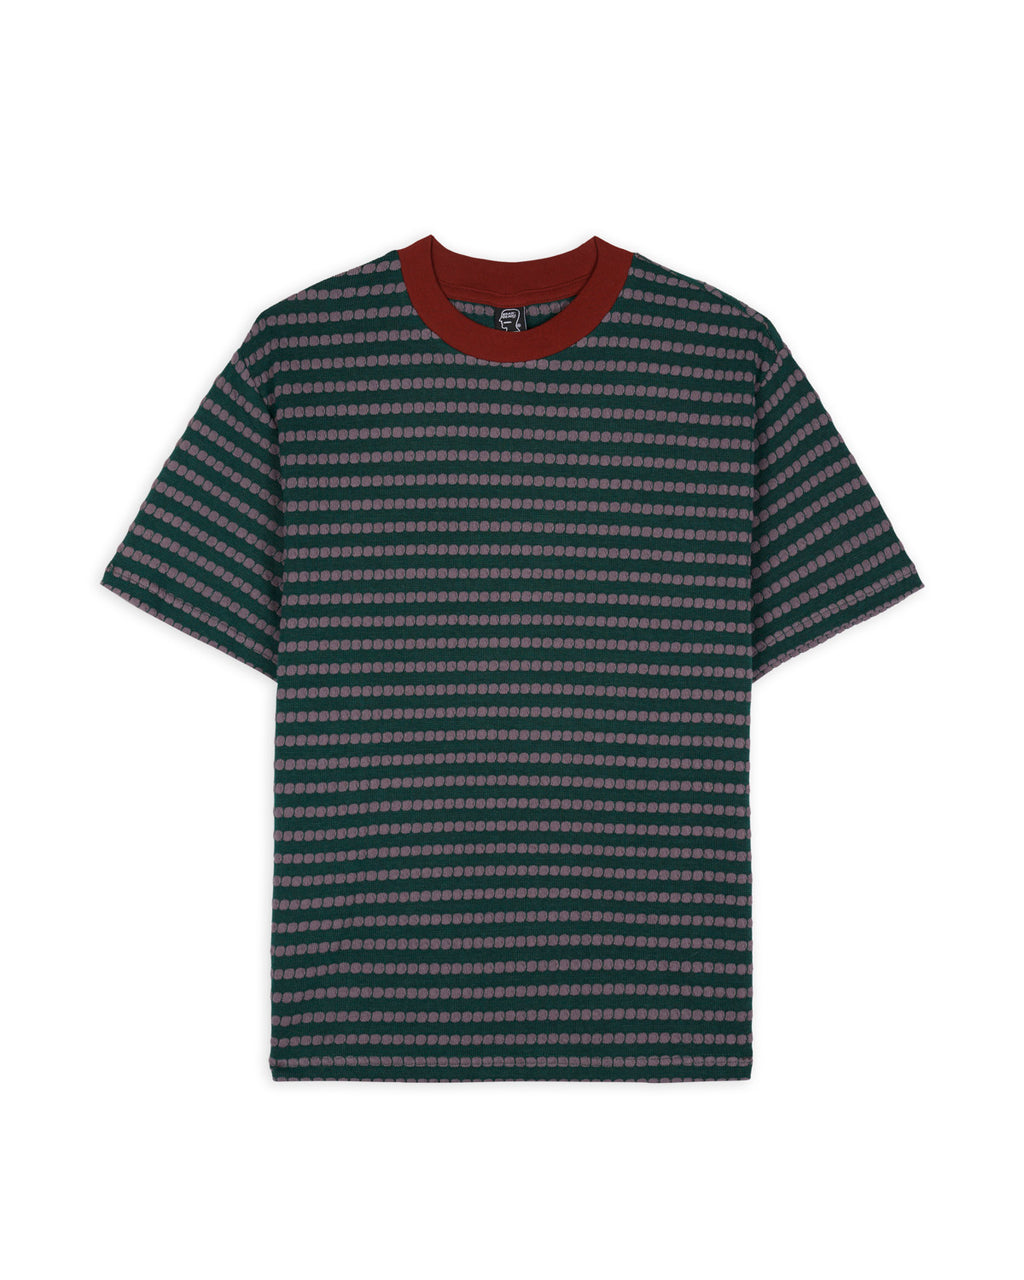 Raised Dot Striped T-shirt - Forest Green